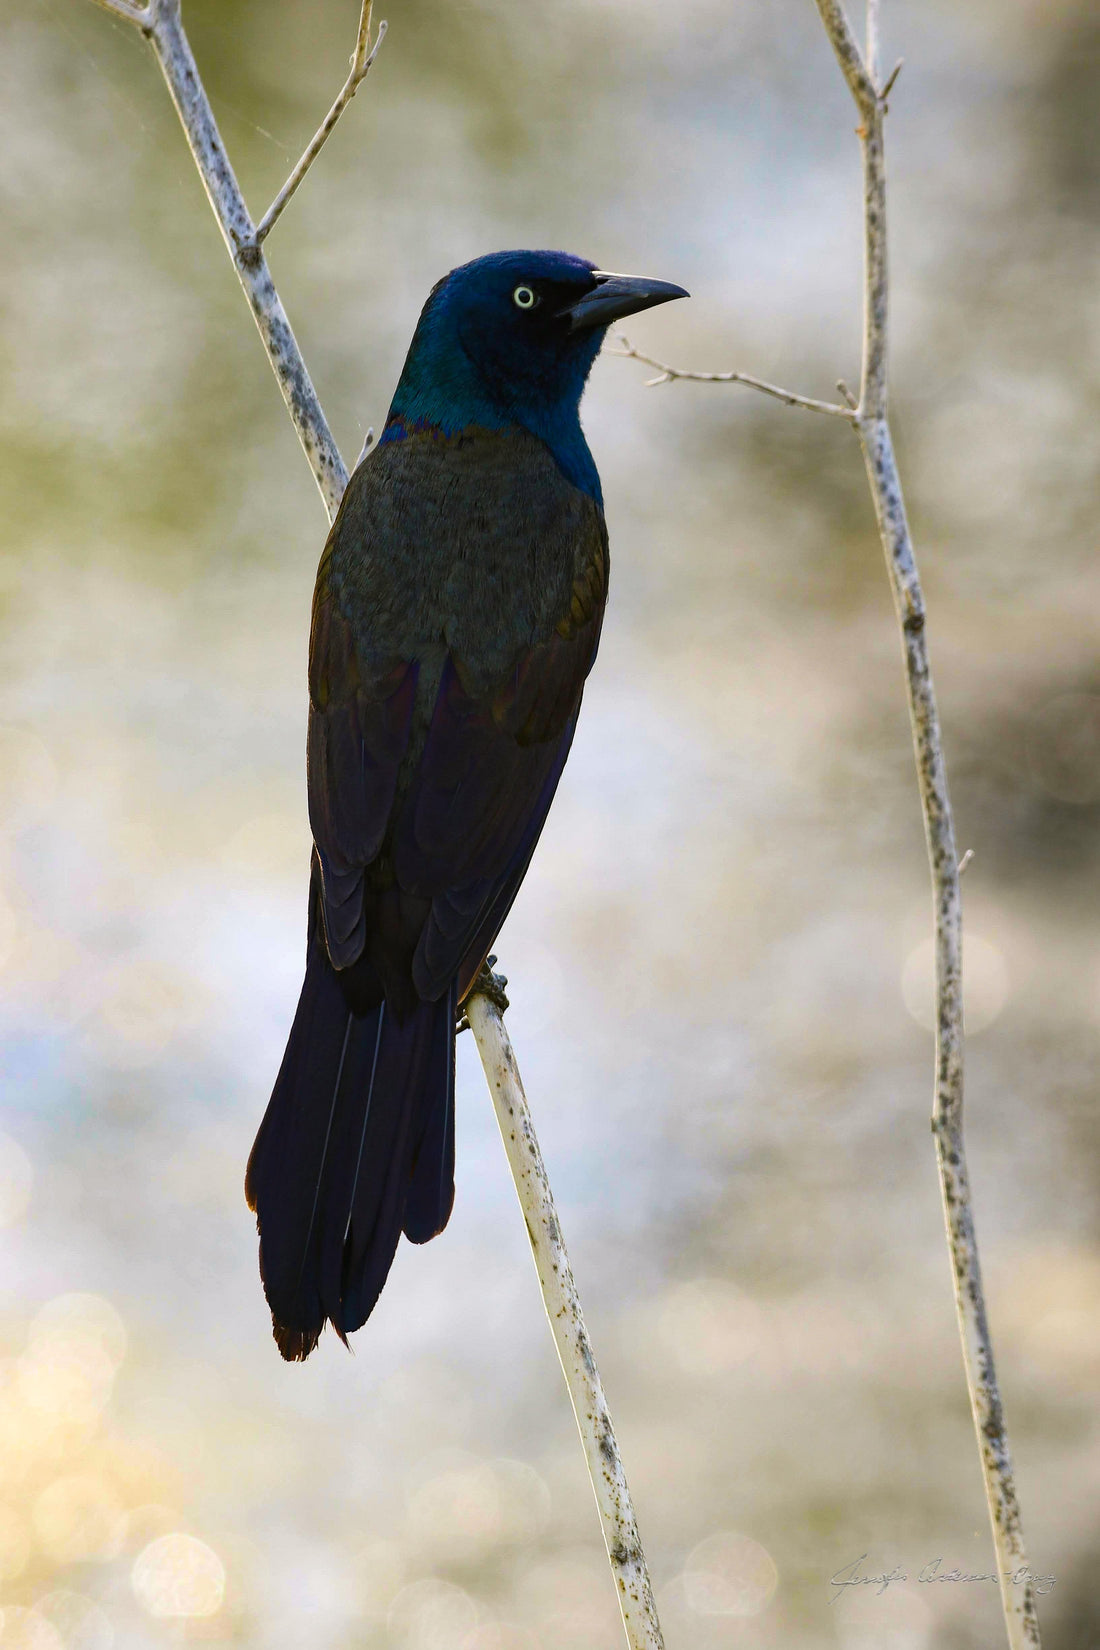 MWC Eco-brief: Common Grackles disappearing